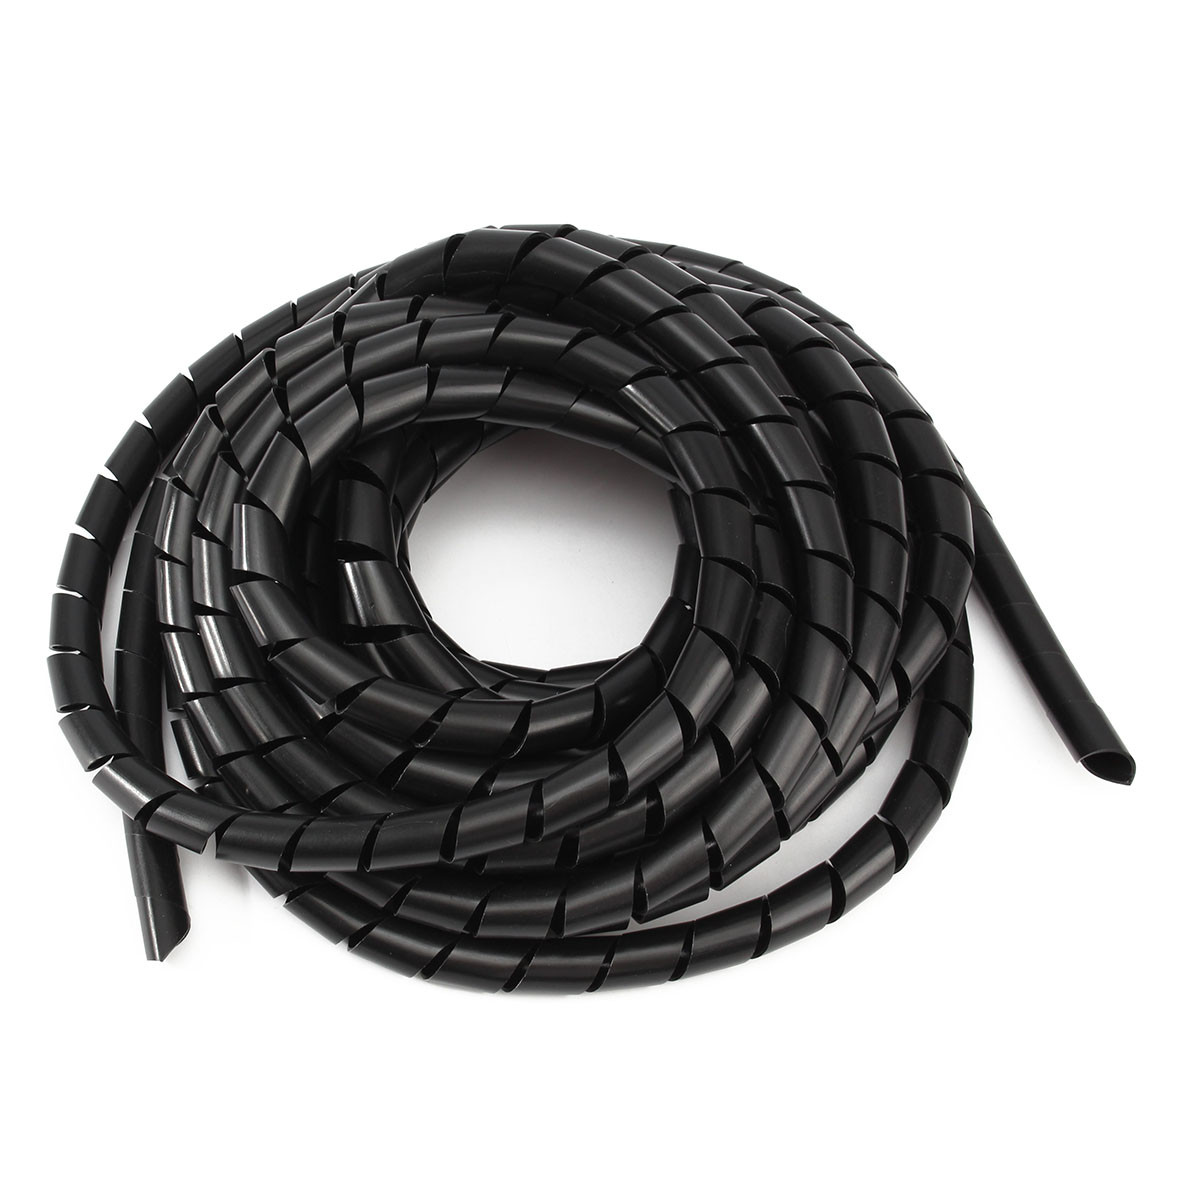 Black-Spiral-Polyethylene-Cable-Electrical-Wire-Wrap-Tube-Computer-Manage-Cord-1089427-3